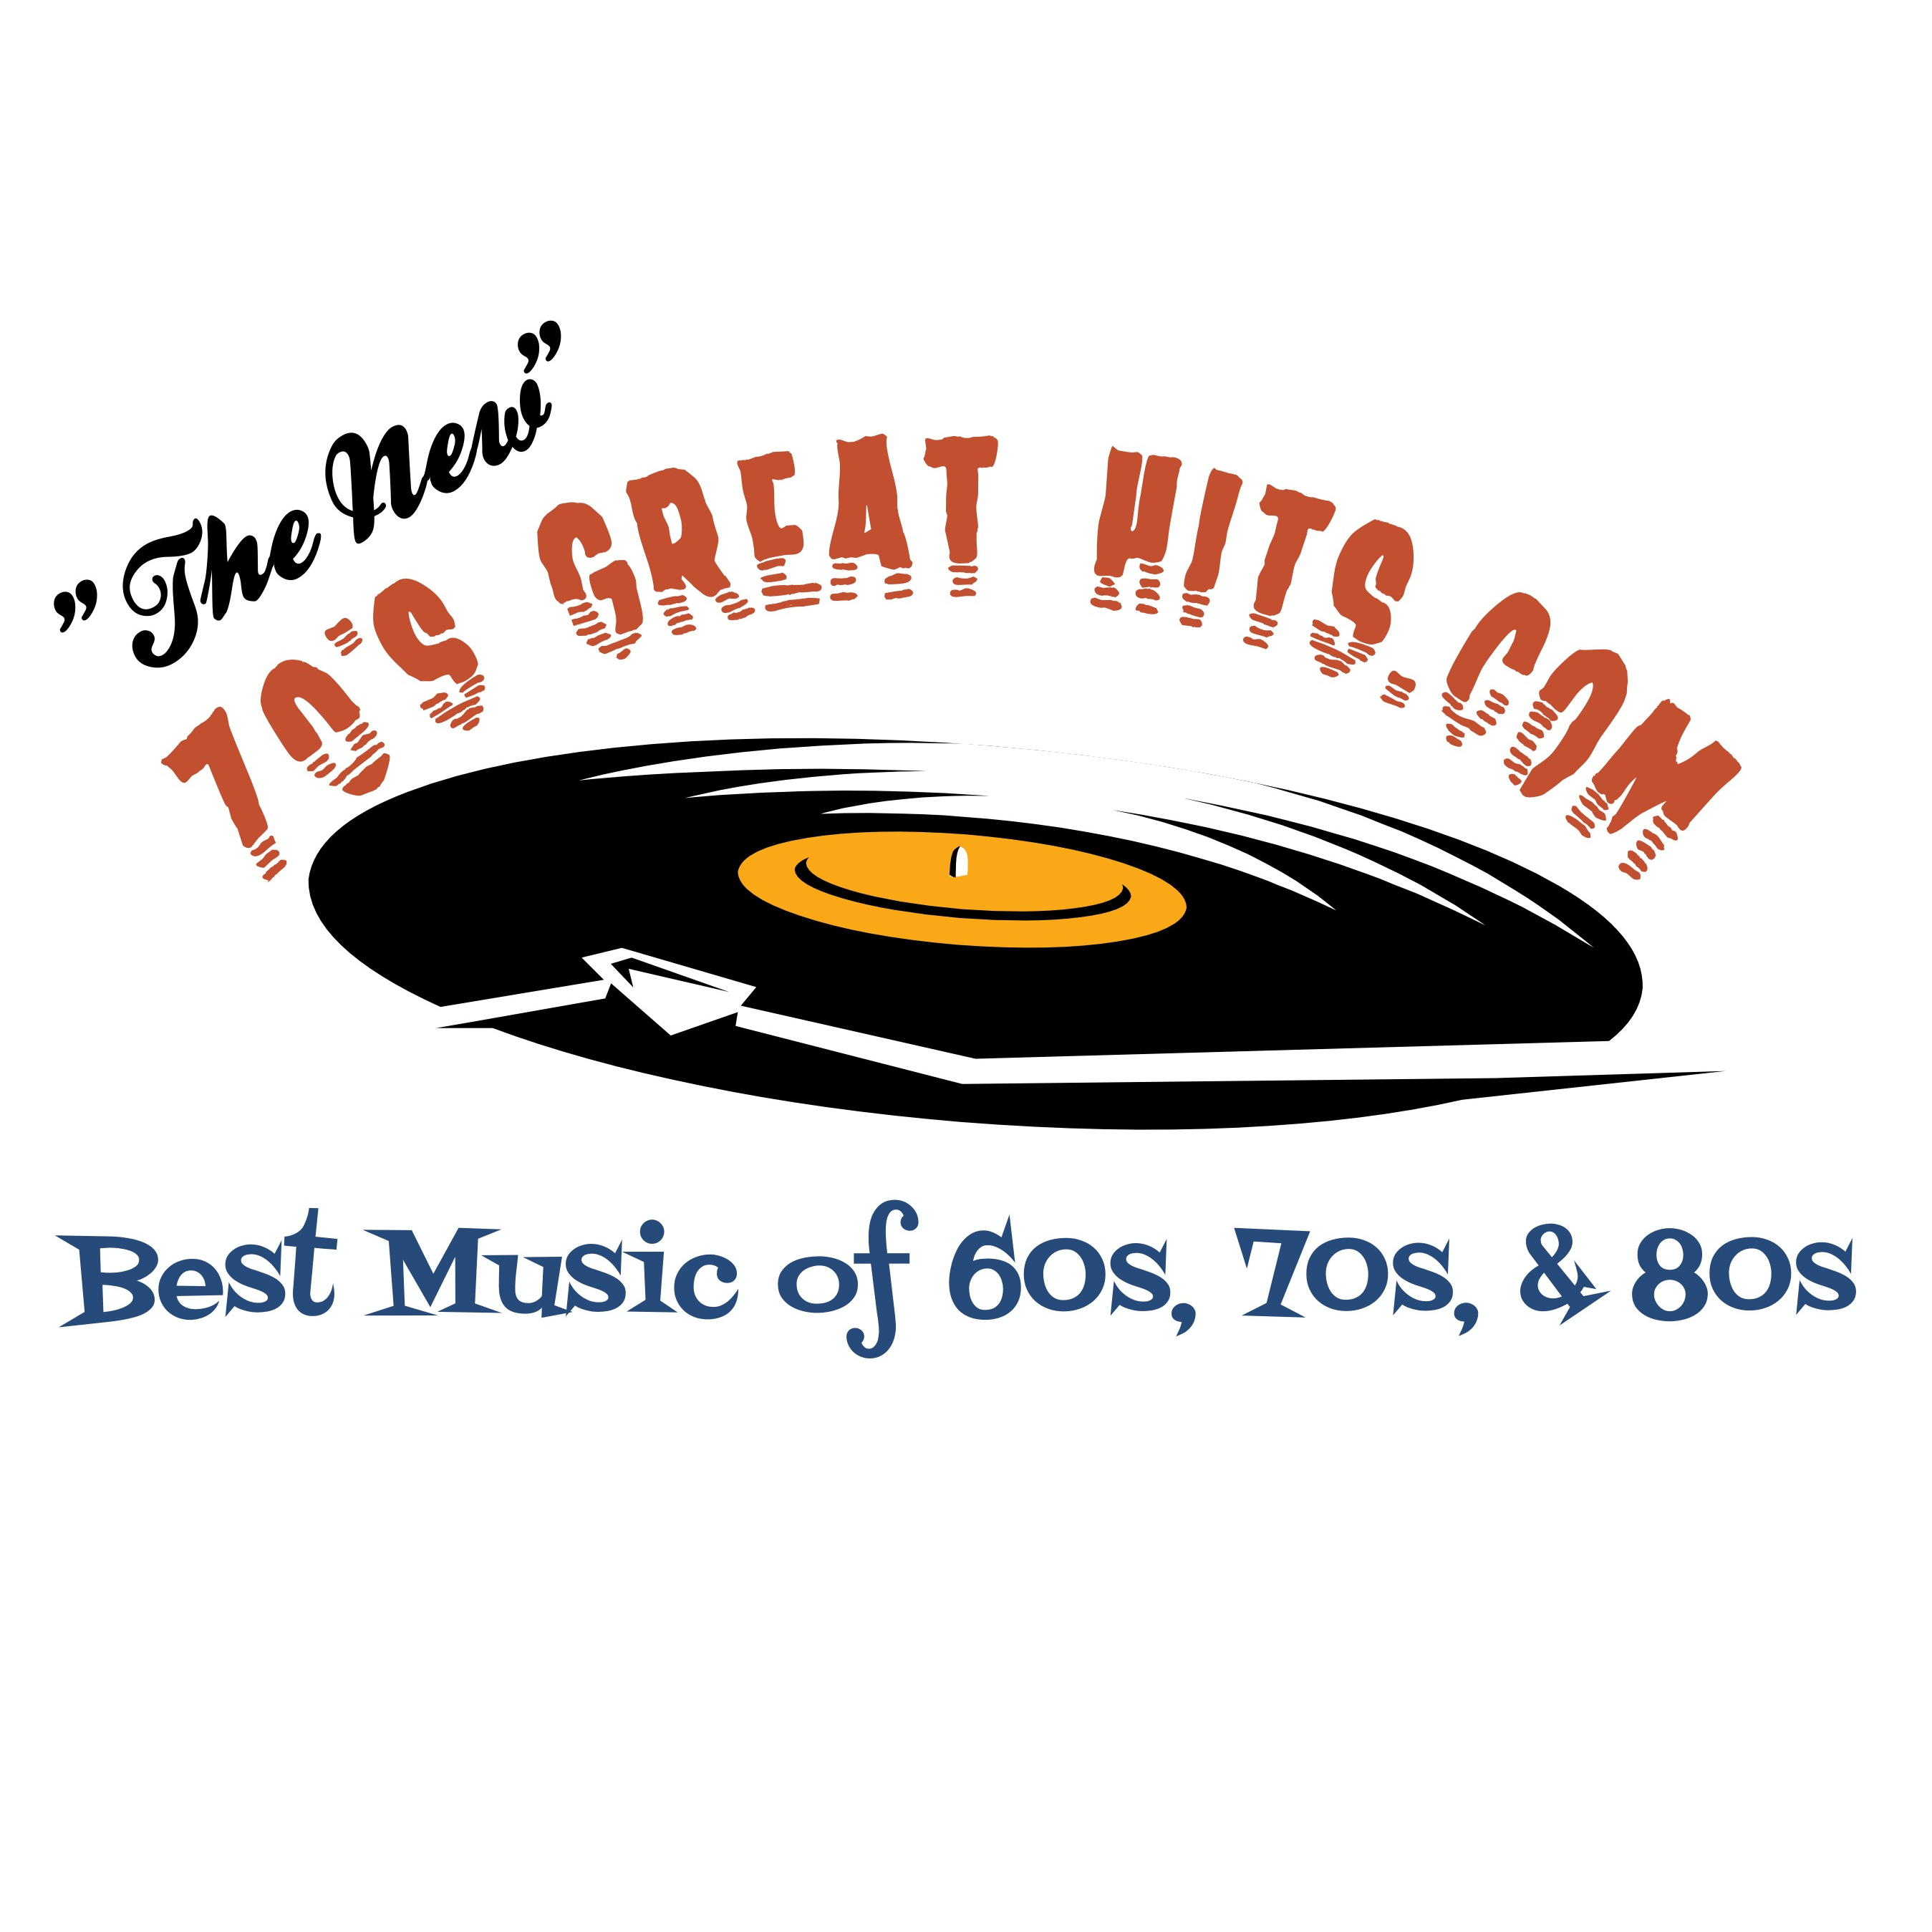 70s Great Hits